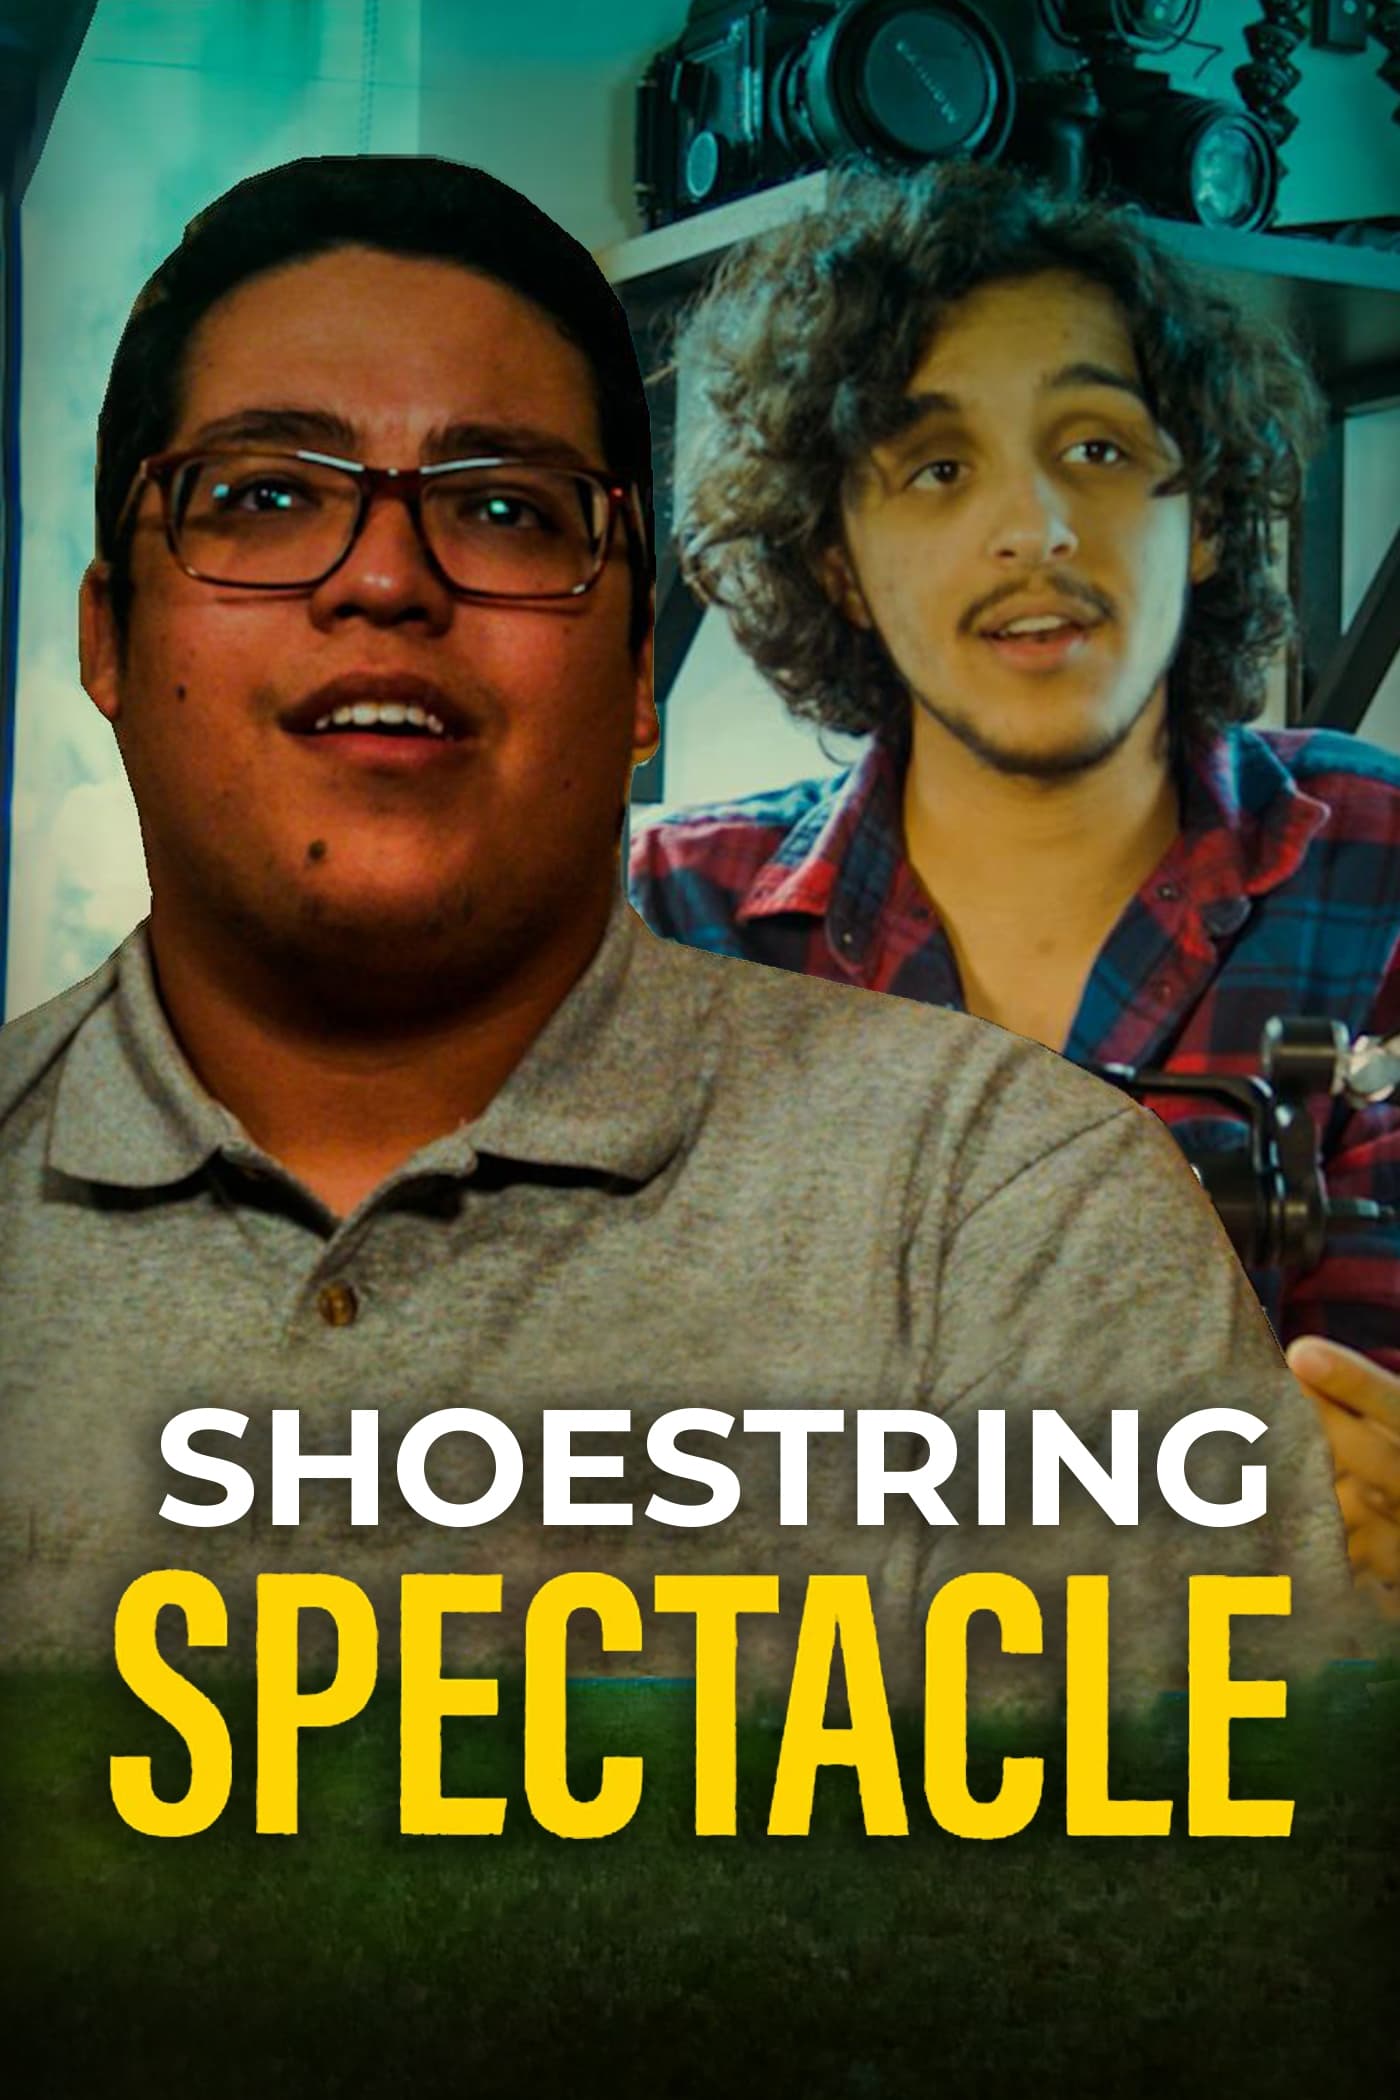 Shoestring Spectacle